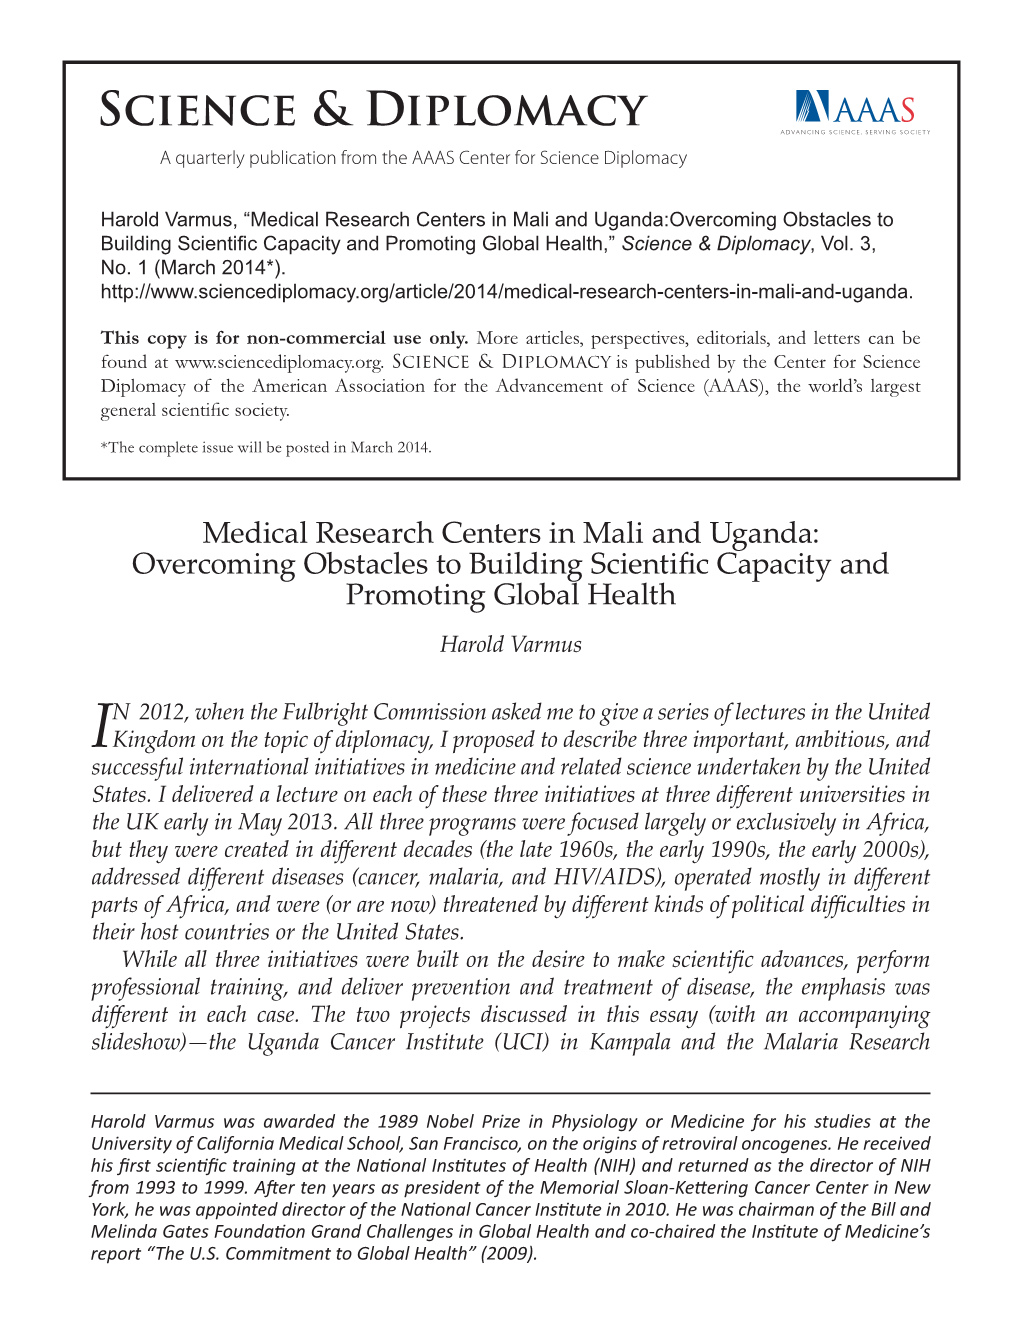 Medical Research Centers in Mali and Uganda:Overcoming Obstacles to Building Scientific Capacity and Promoting Global Health,” Science & Diplomacy, Vol